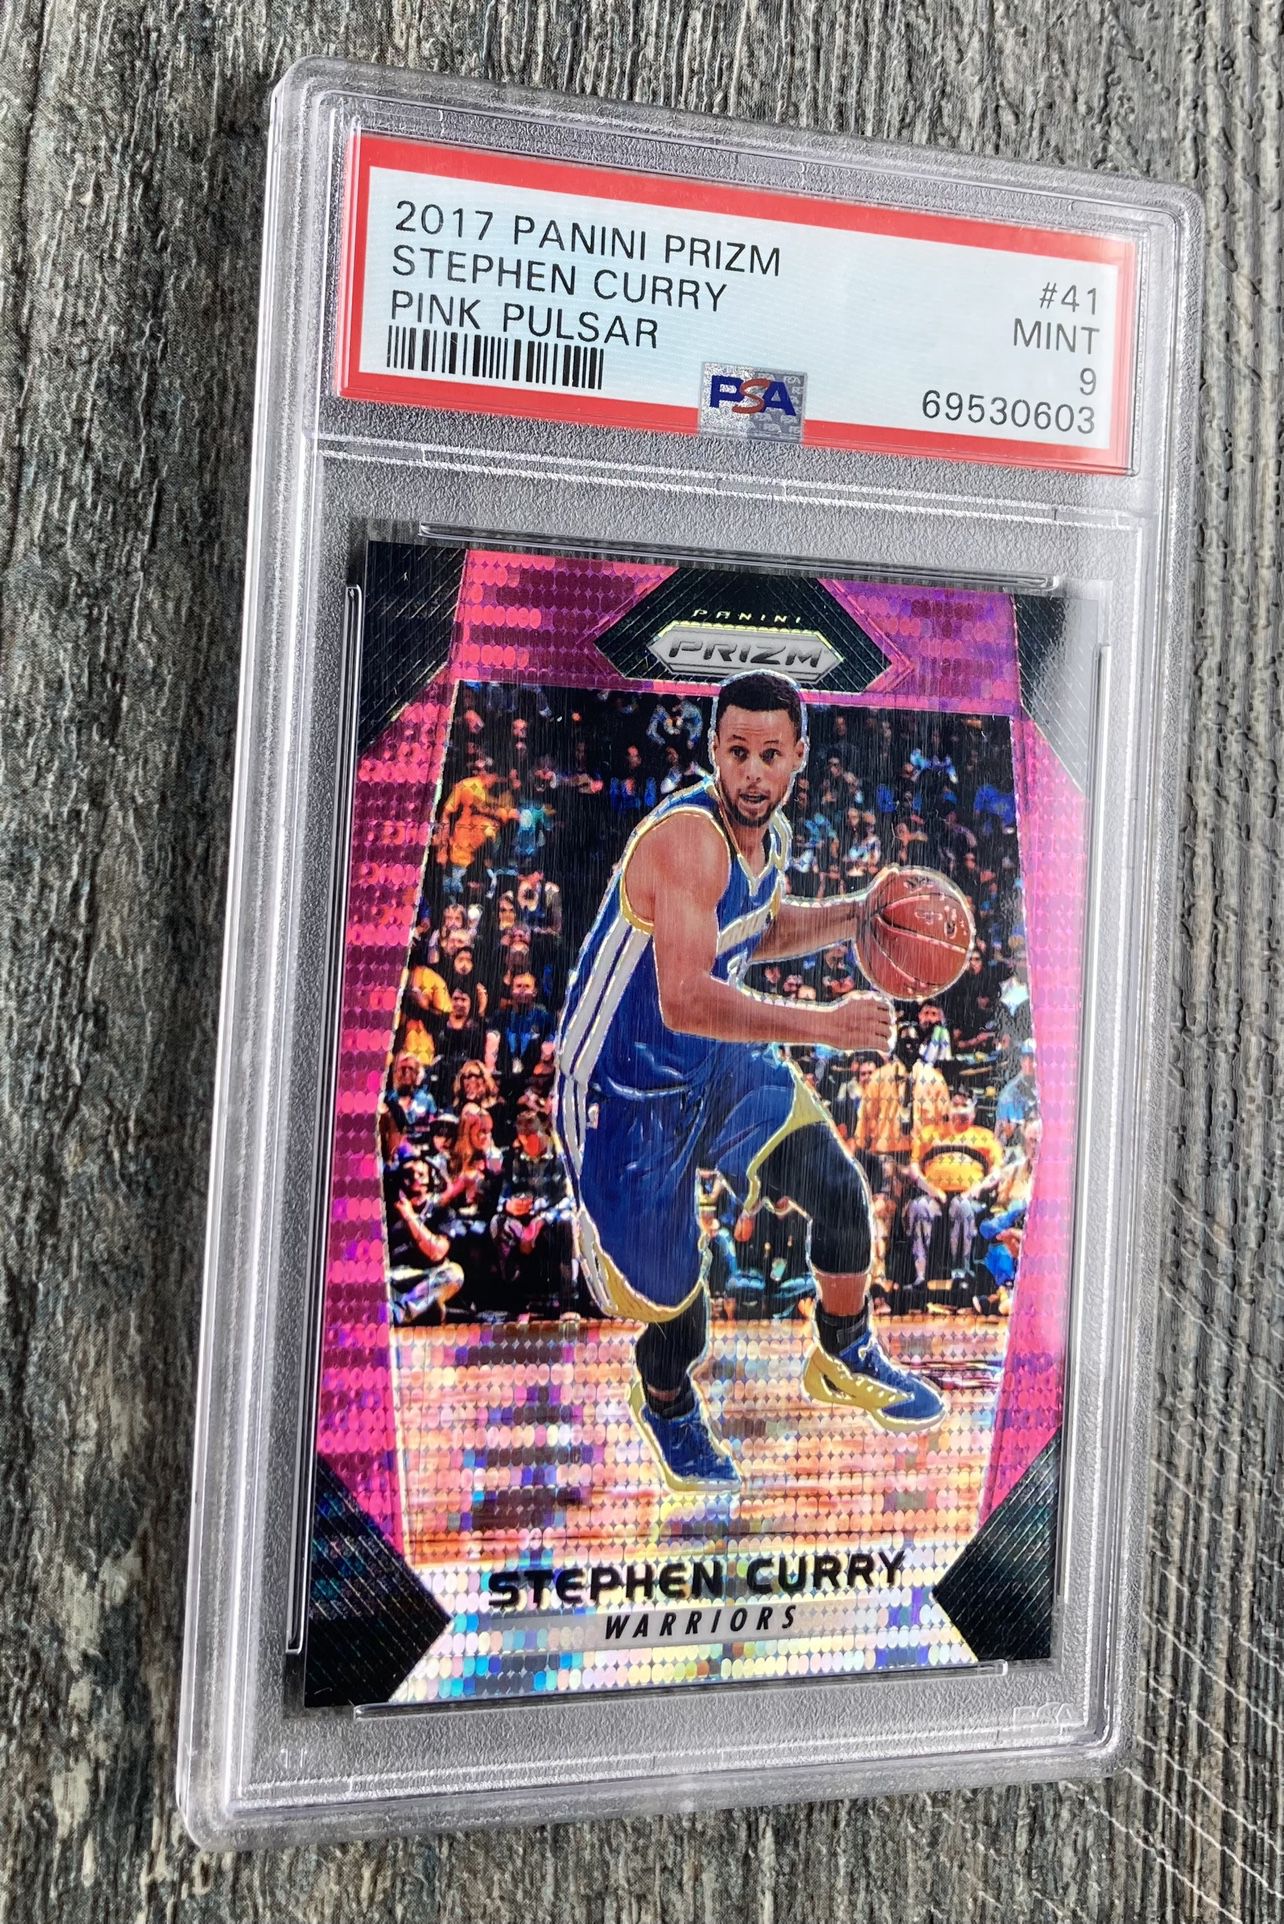 2017 Panini Prizm Stephen Curry Basketball Card for Sale in Everett